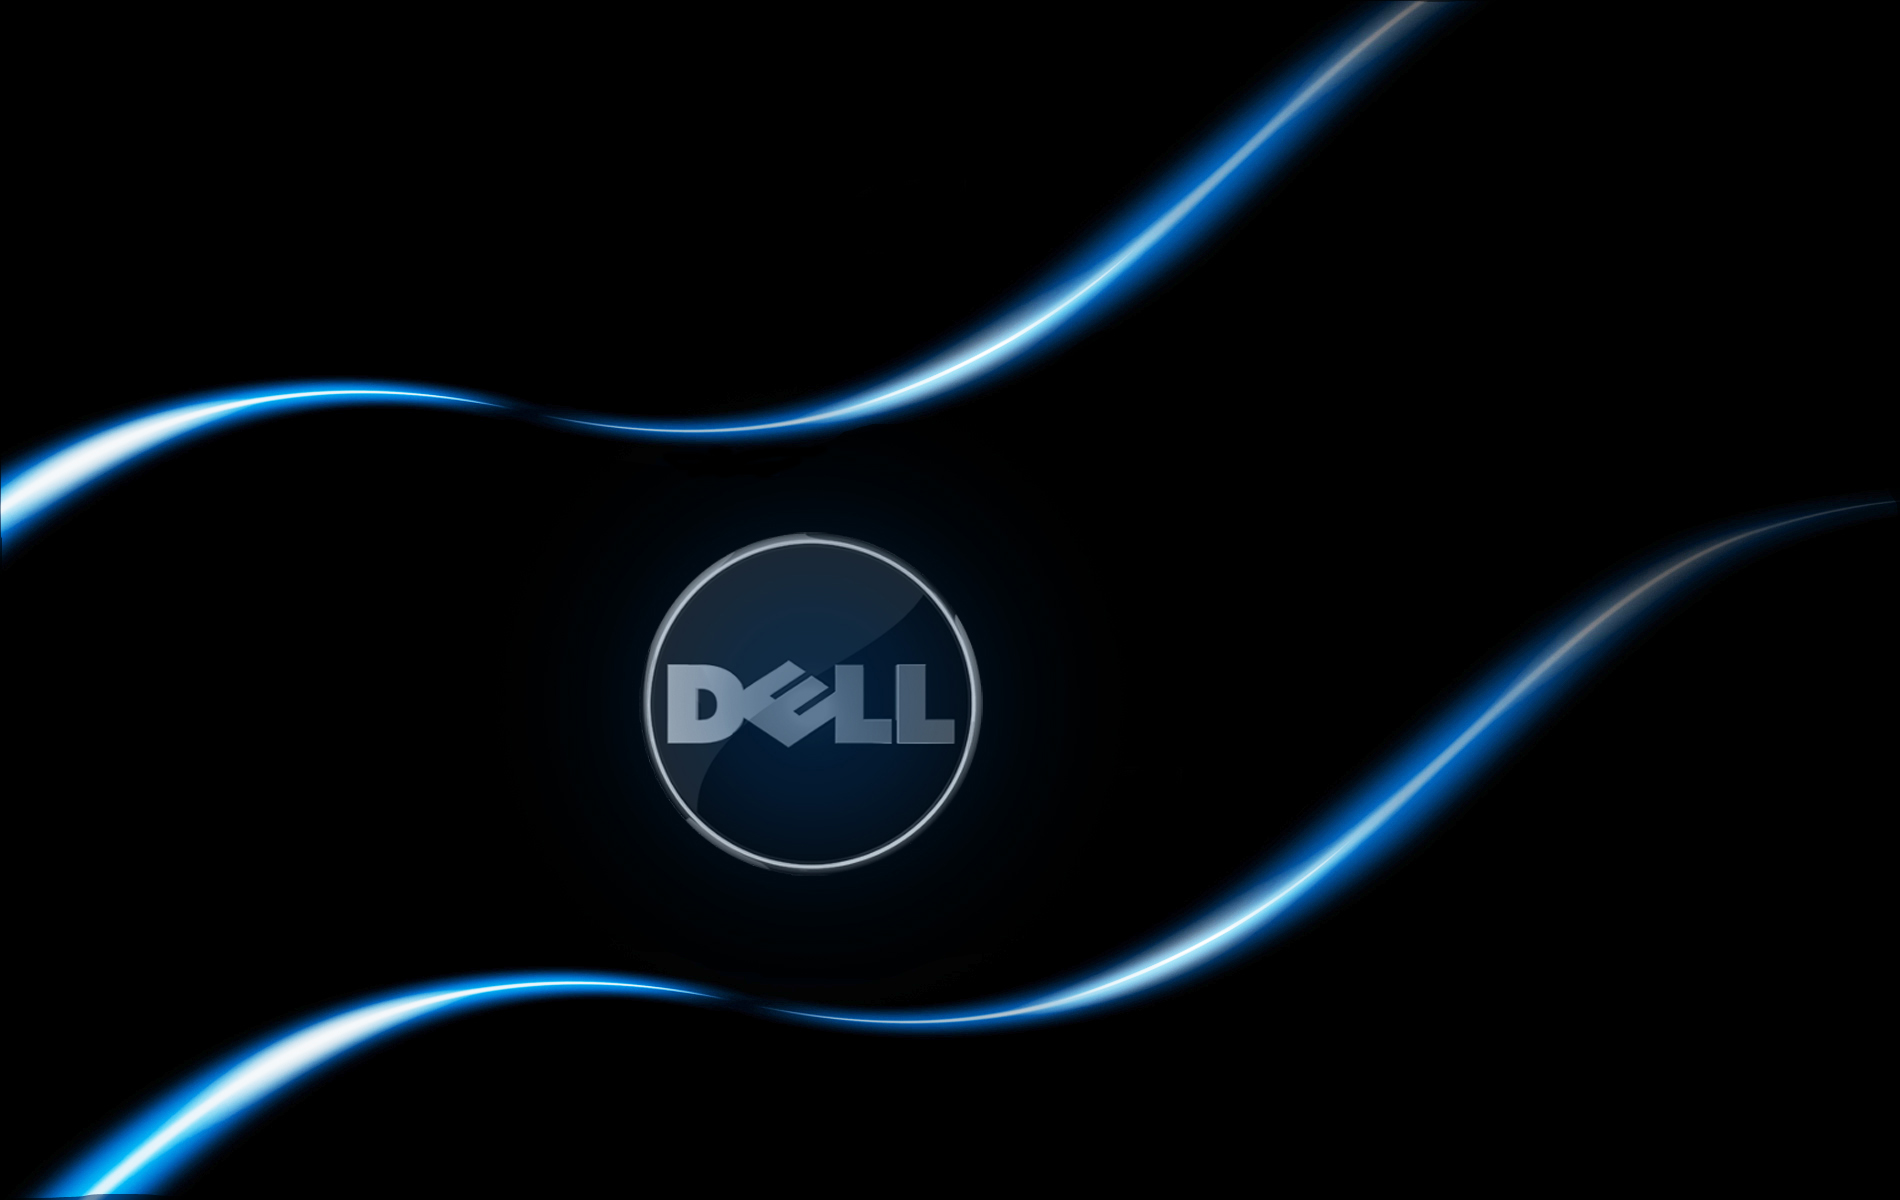 Free Download 50 Dell Wallpaper Windows 10 On Wallpapersafari 1900x10 For Your Desktop Mobile Tablet Explore 56 Dell Windows 8 1 Wallpaper Dell Windows 7 Desktop Wallpaper Dell Wallpaper Windows 10 Windows 8 1 Wallpapers For Laptop